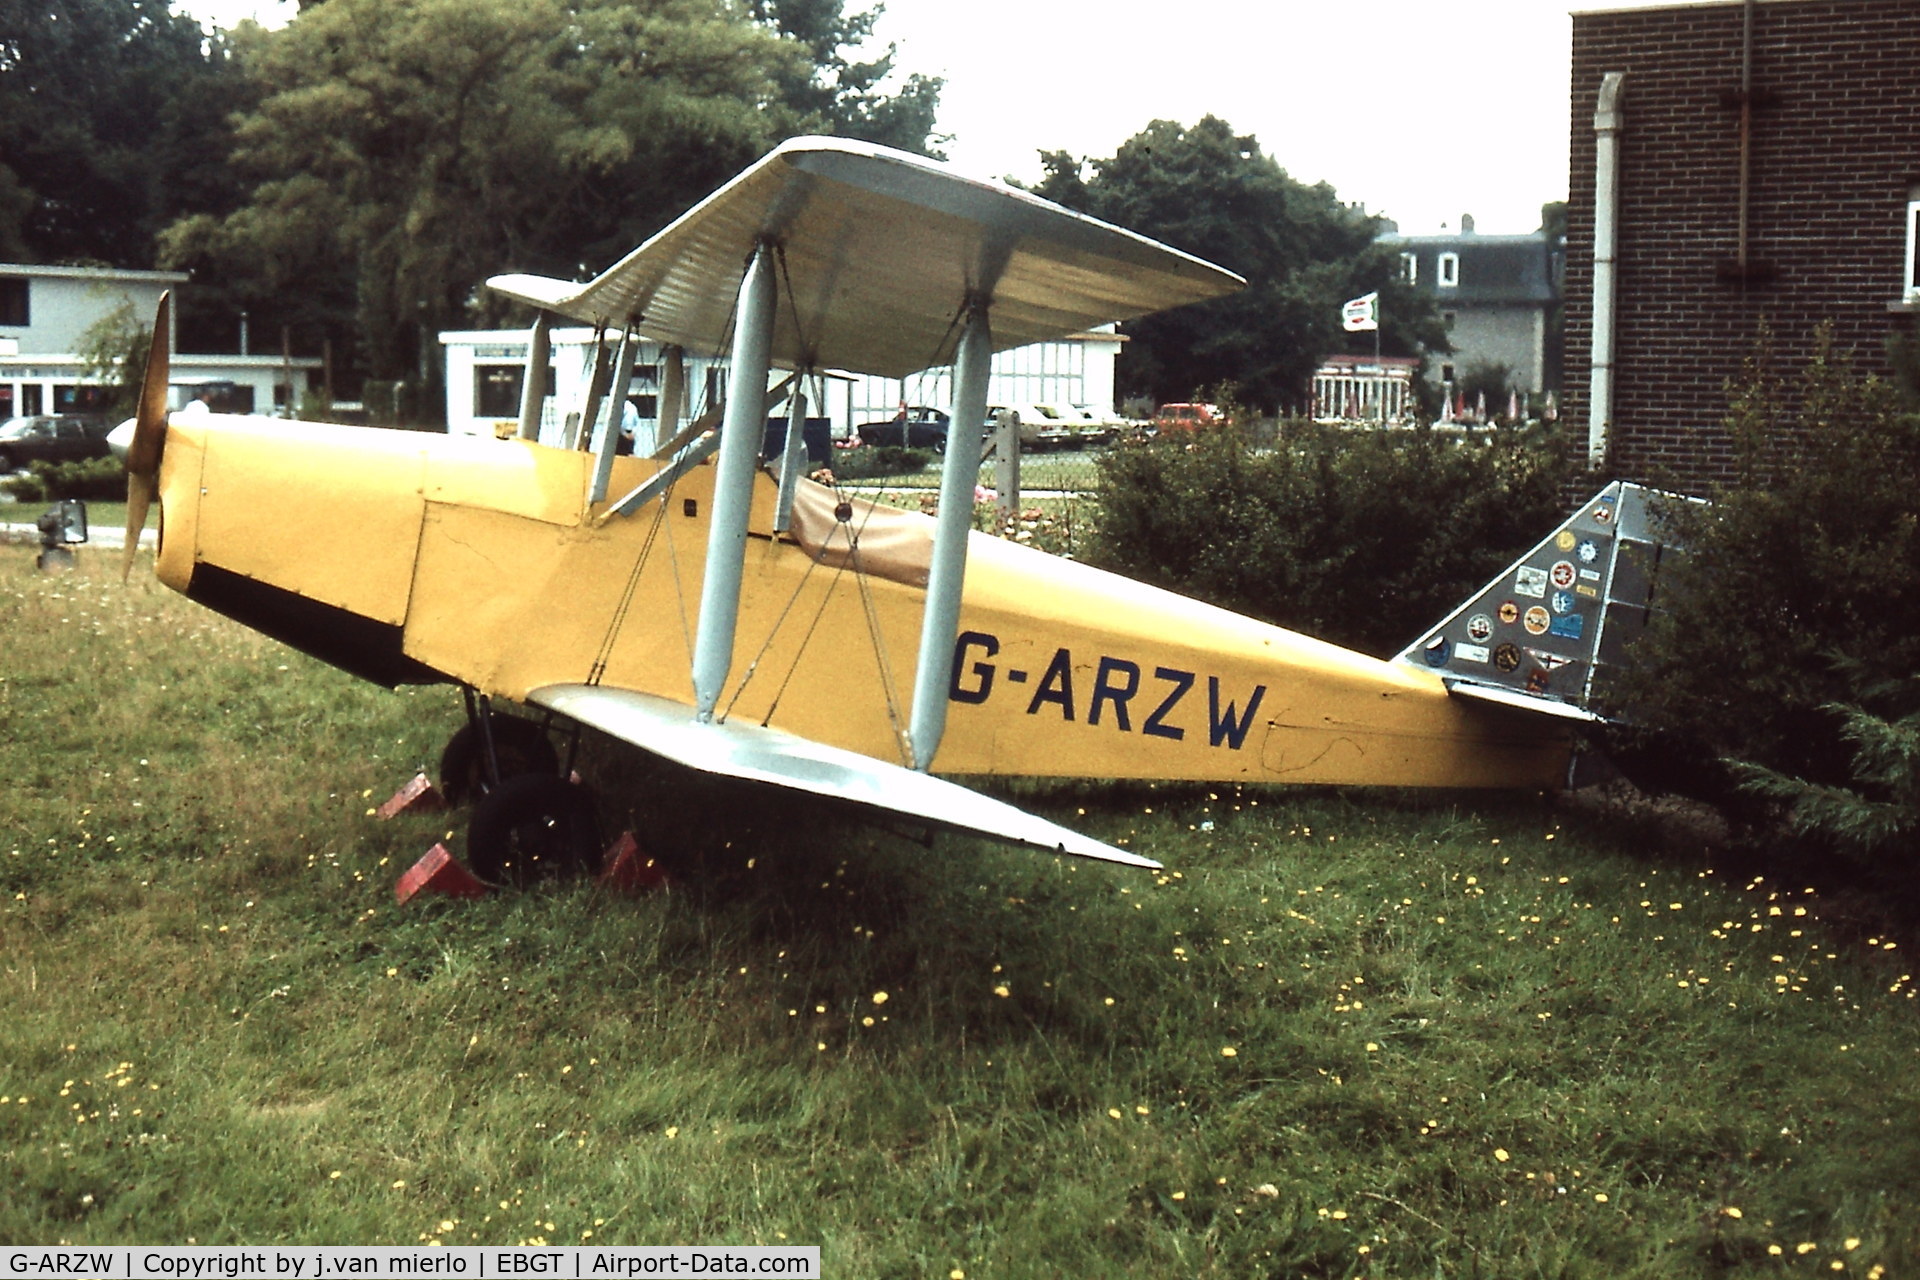 G-ARZW, 1962 Currie Wot C/N 1, STELLA AIRRACE Ghent, Belgium end'70s